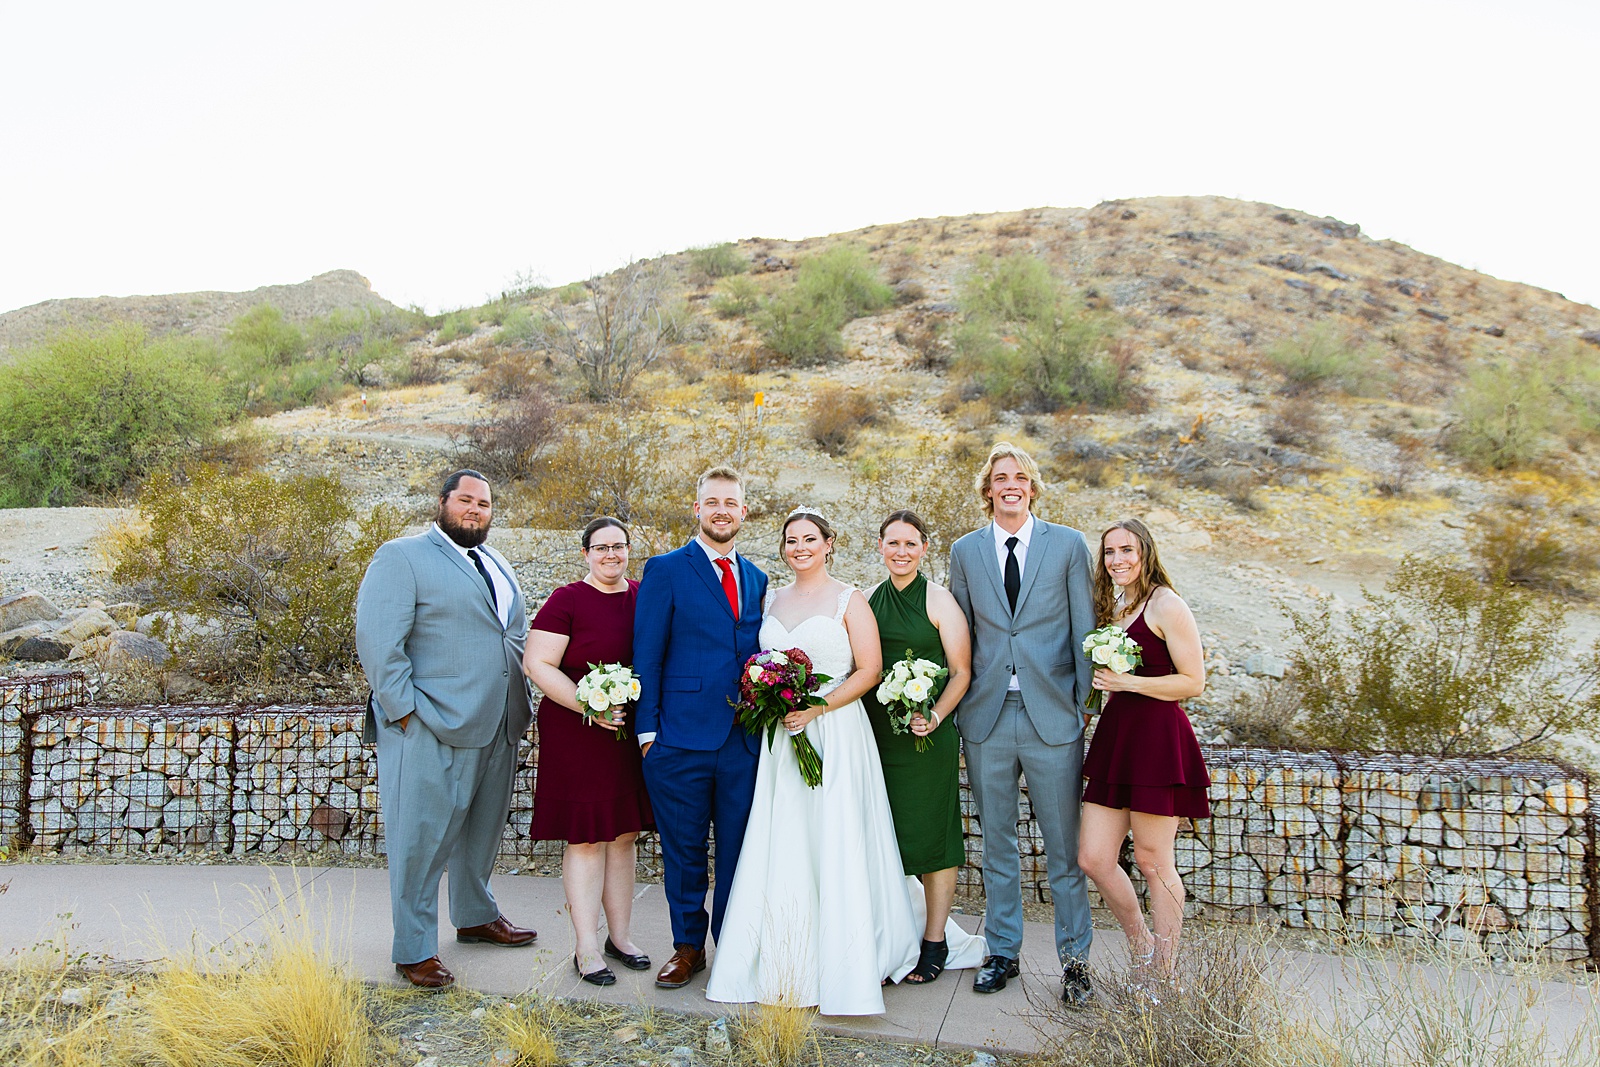 Bridal party together at a intimate desert wedding by Arizona wedding photographer Juniper and Co Photography.